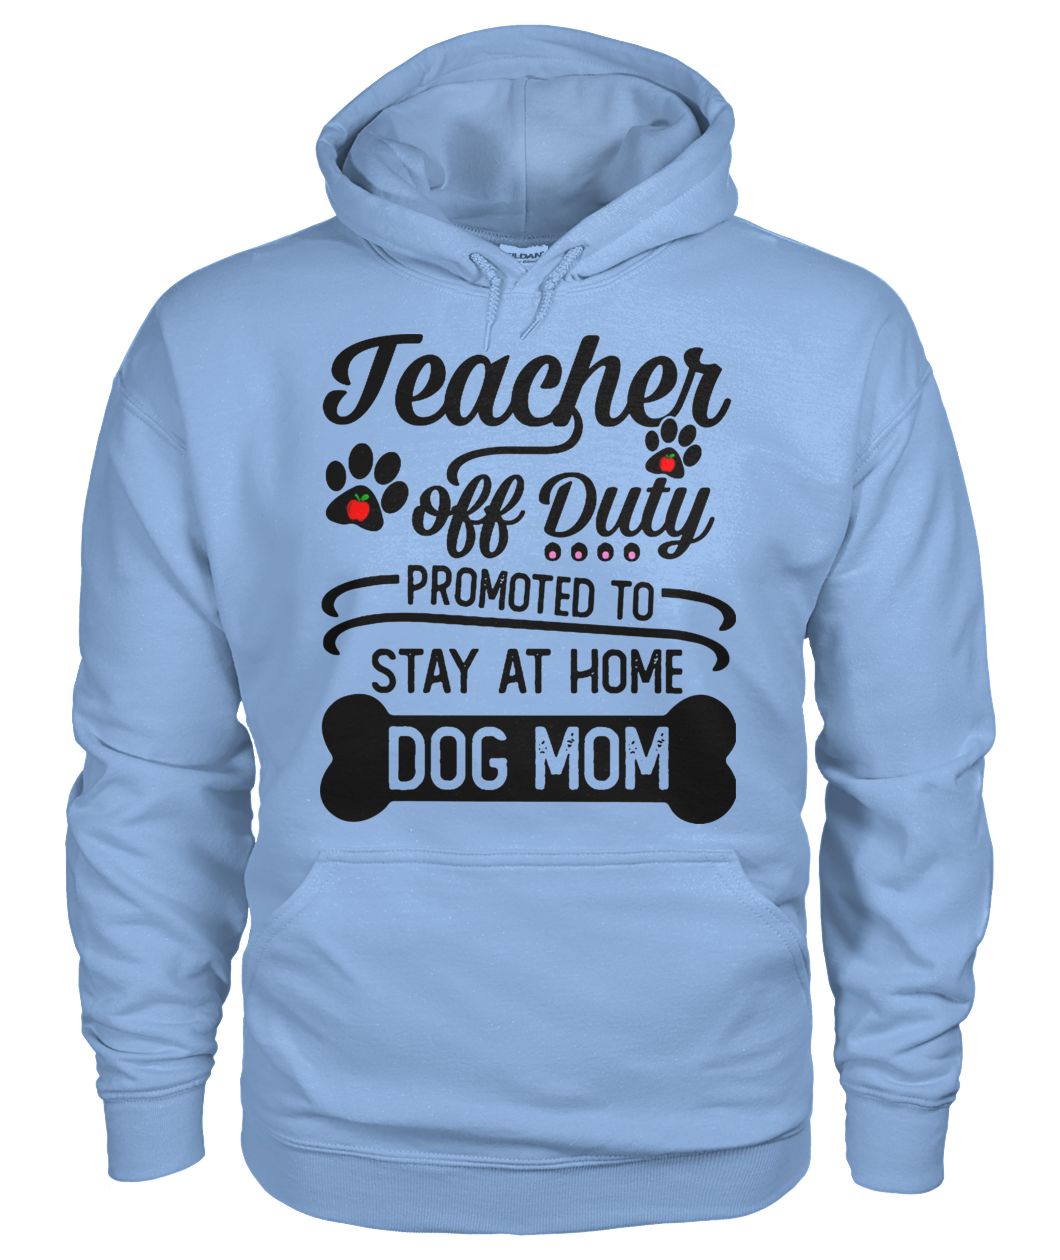 Teacher off duty promoted to say at home dog mom gildan hoodie